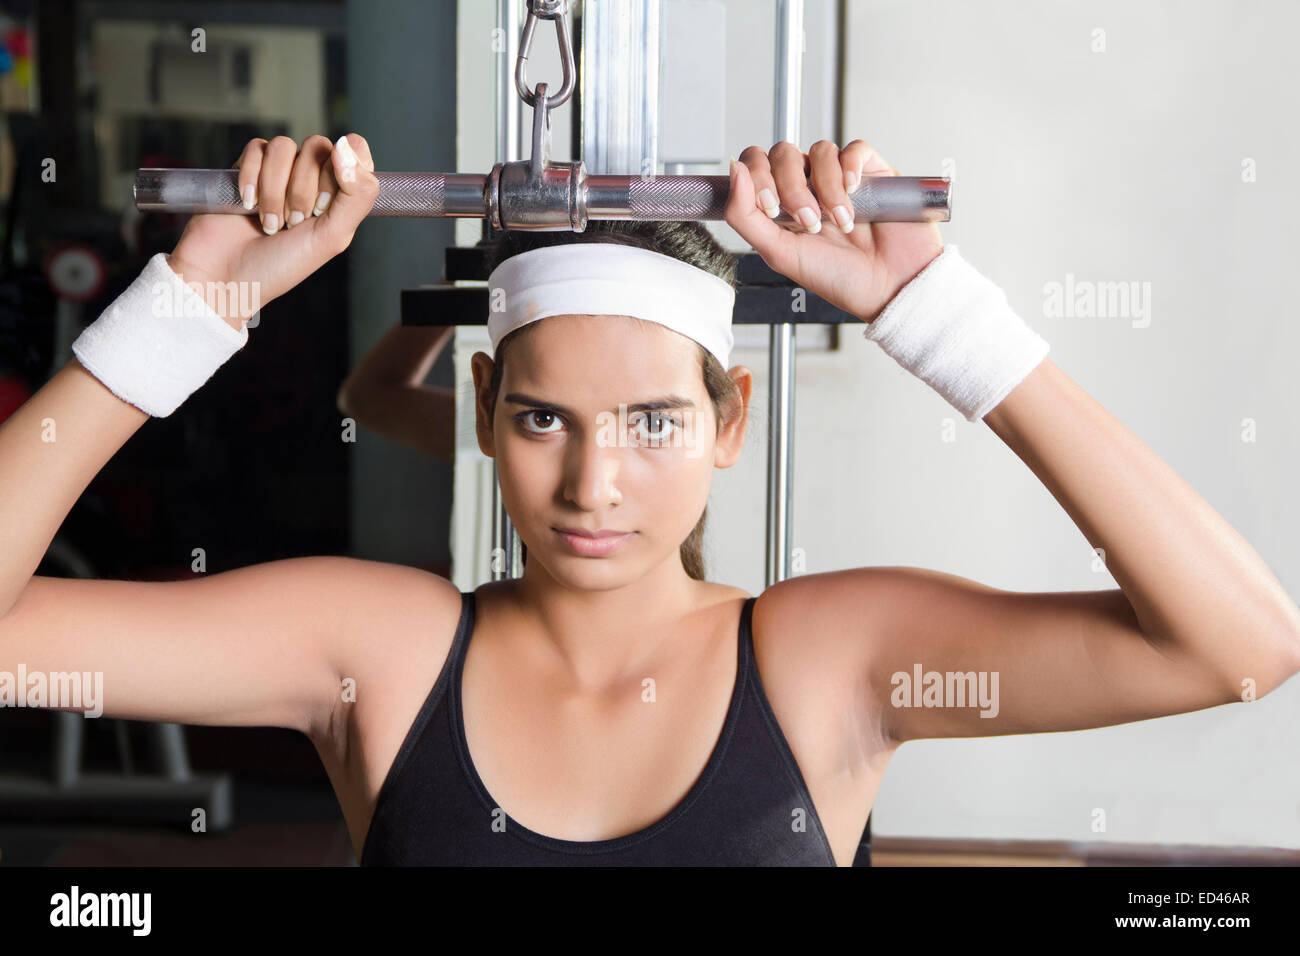 1 sport indiano lady palestra Body Building Foto Stock